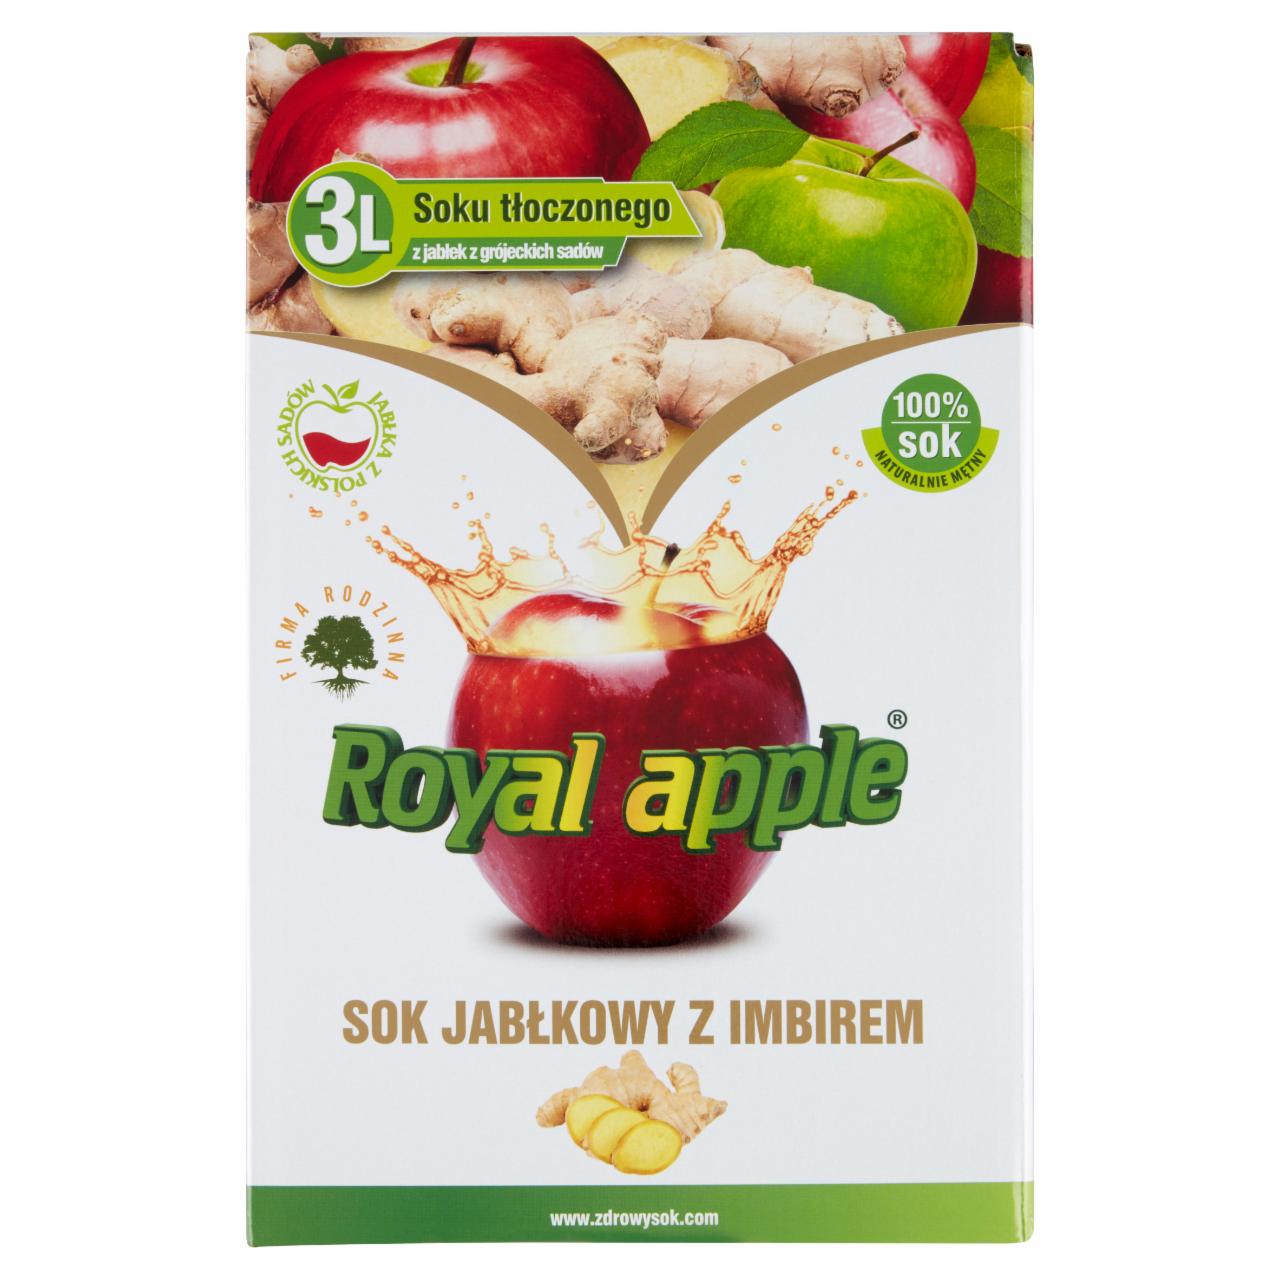 Photo - Royal apple Apple with Ginger Juice 3 L